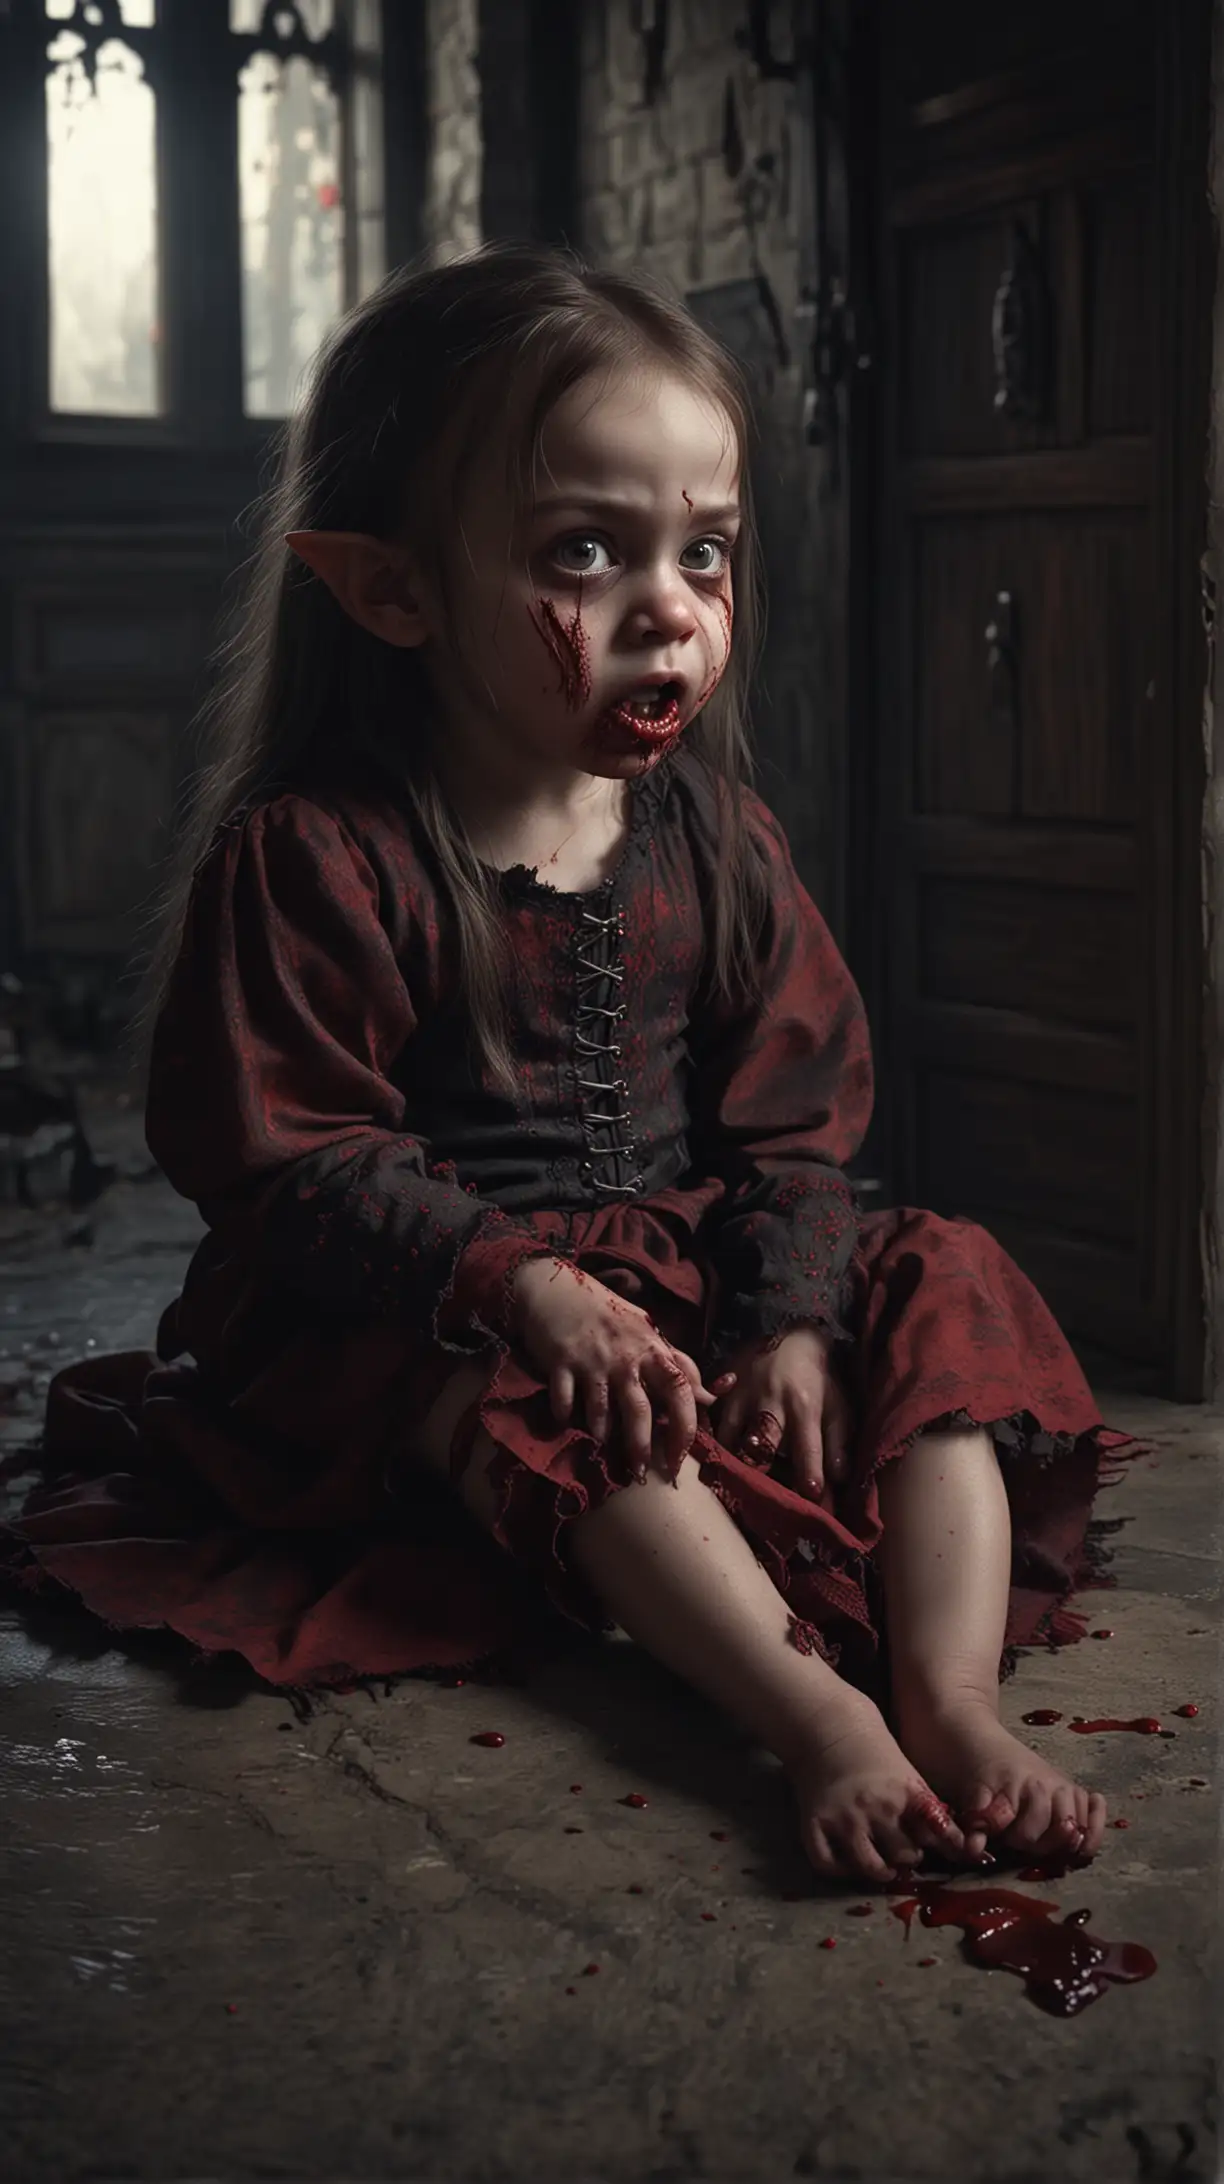 small girl baby demon with ugly and dreadful vampire alike face, who is sitting and sucking blood from sleeper, inside of medival house on background at night, hyper-realistic, photo-realistic